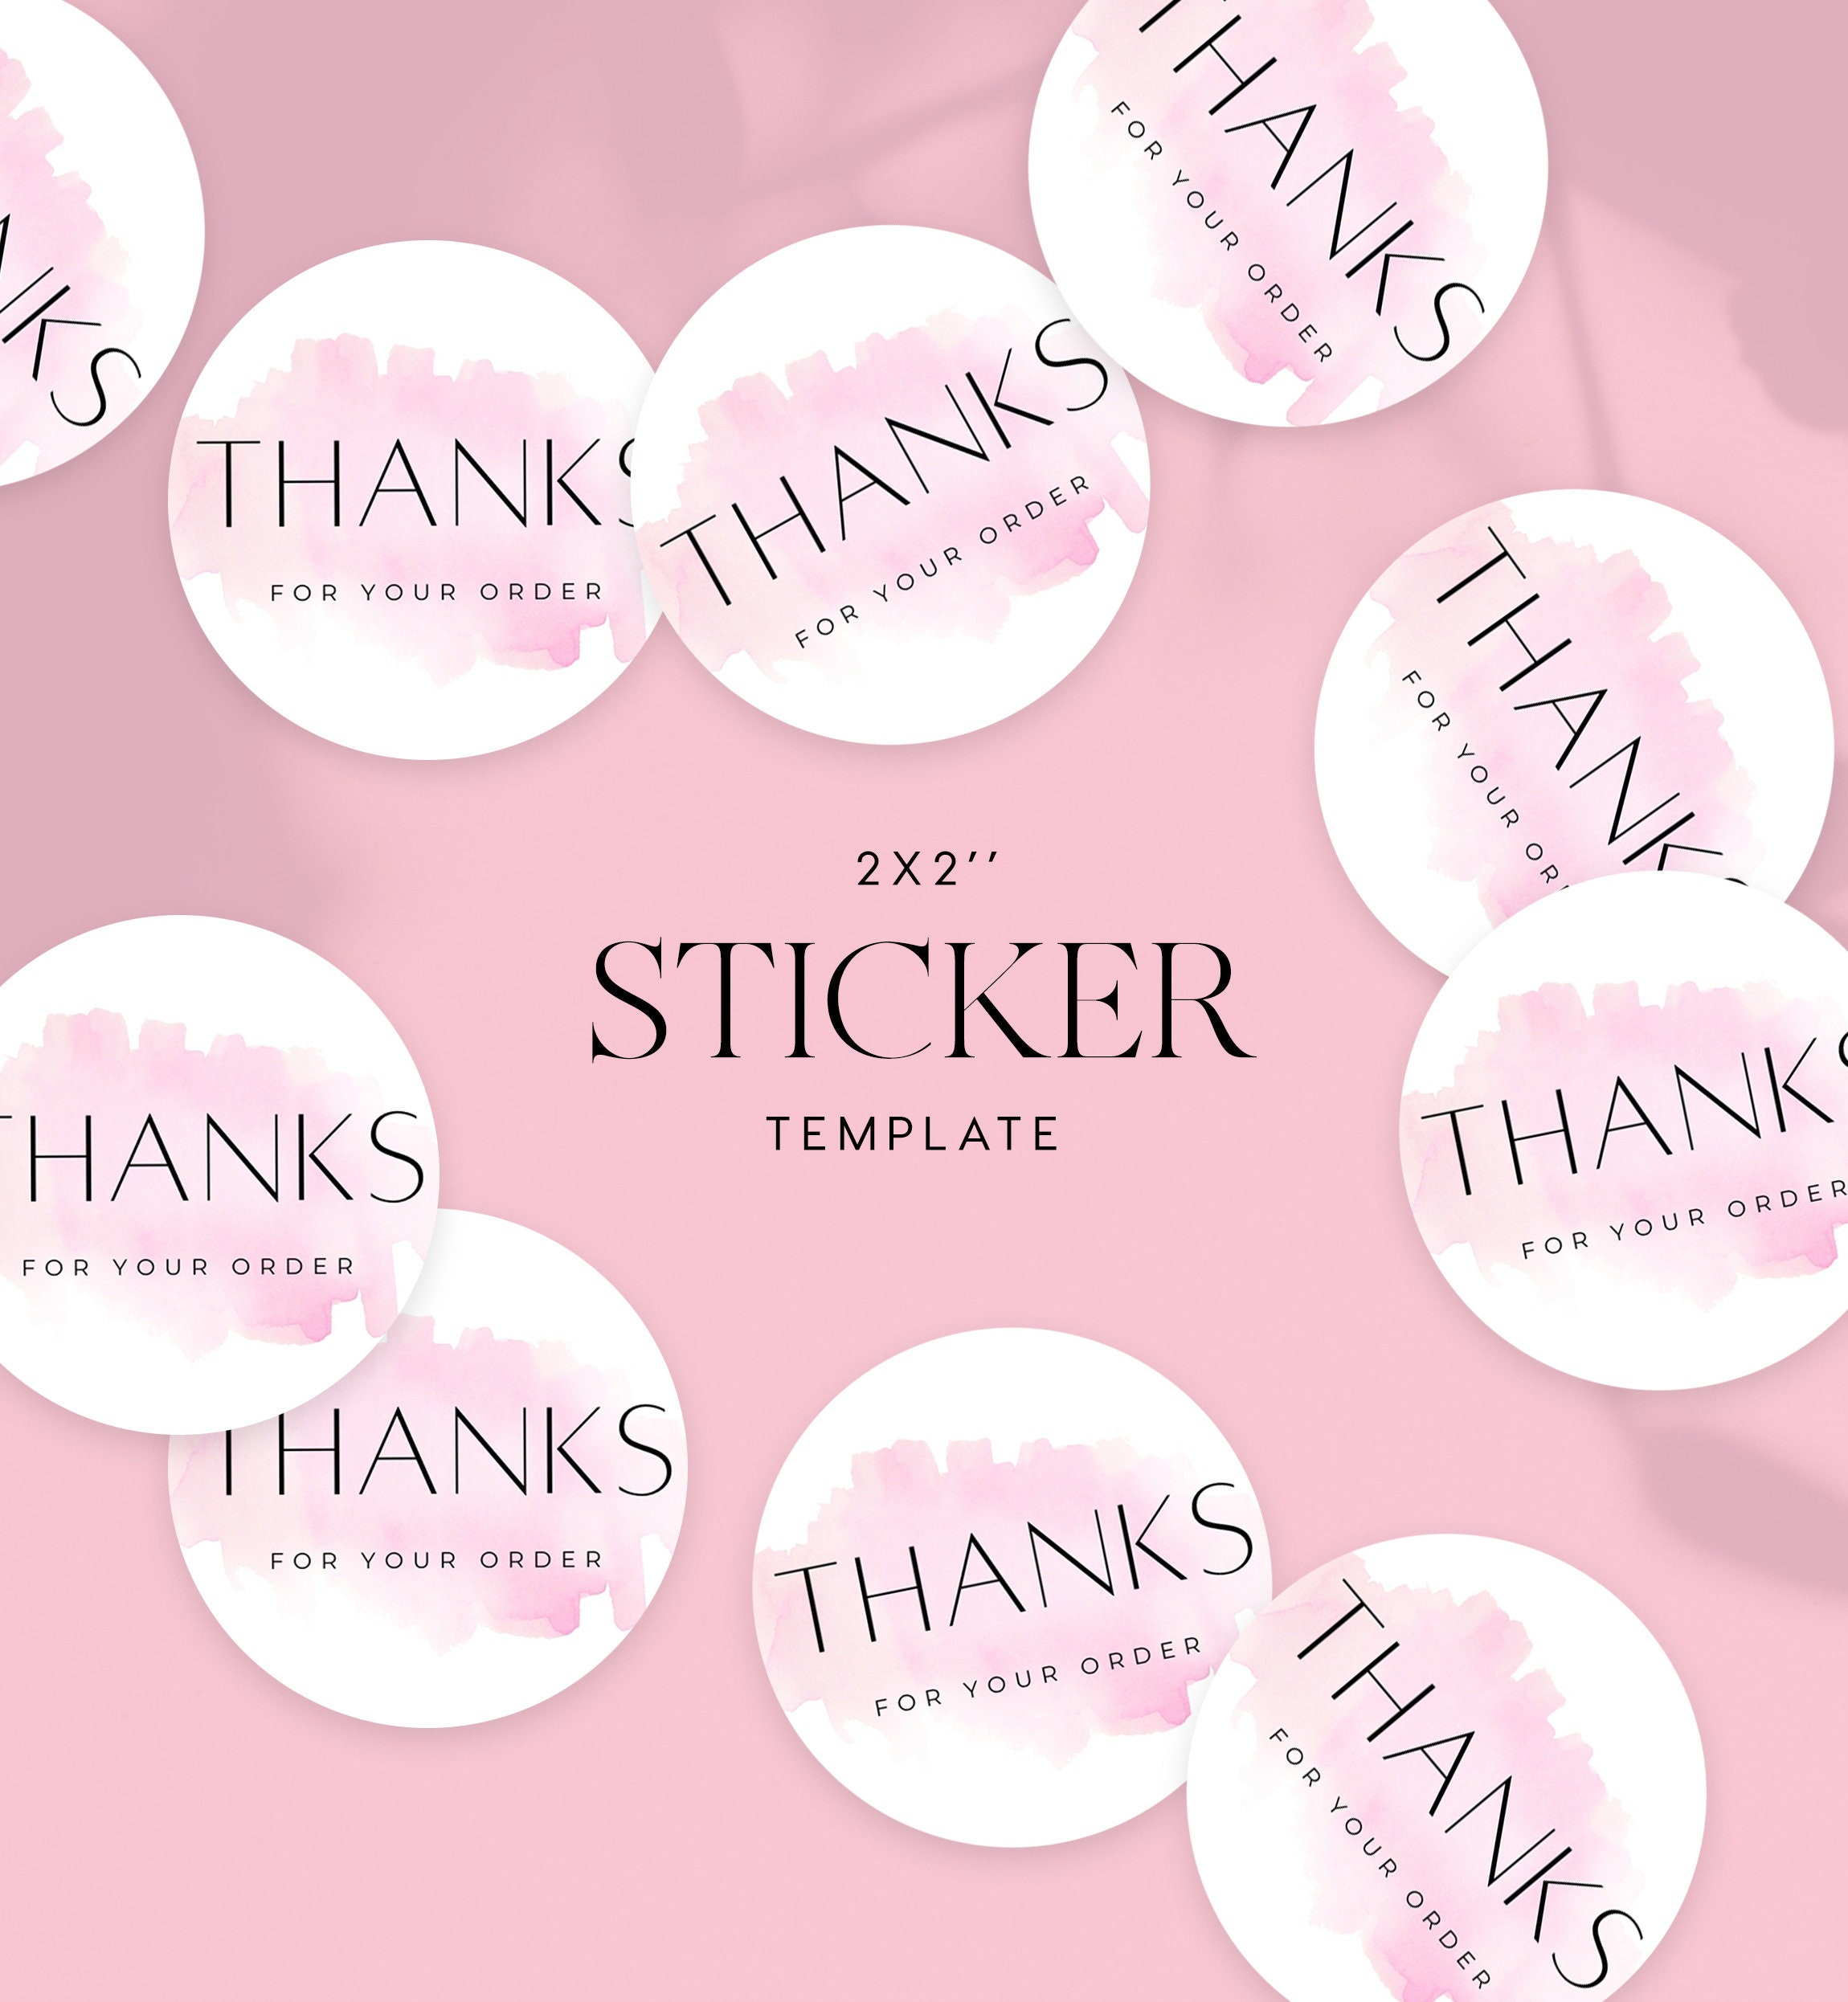 Thank you for your order sticker INSTANT DOWNLOAD Review | Etsy